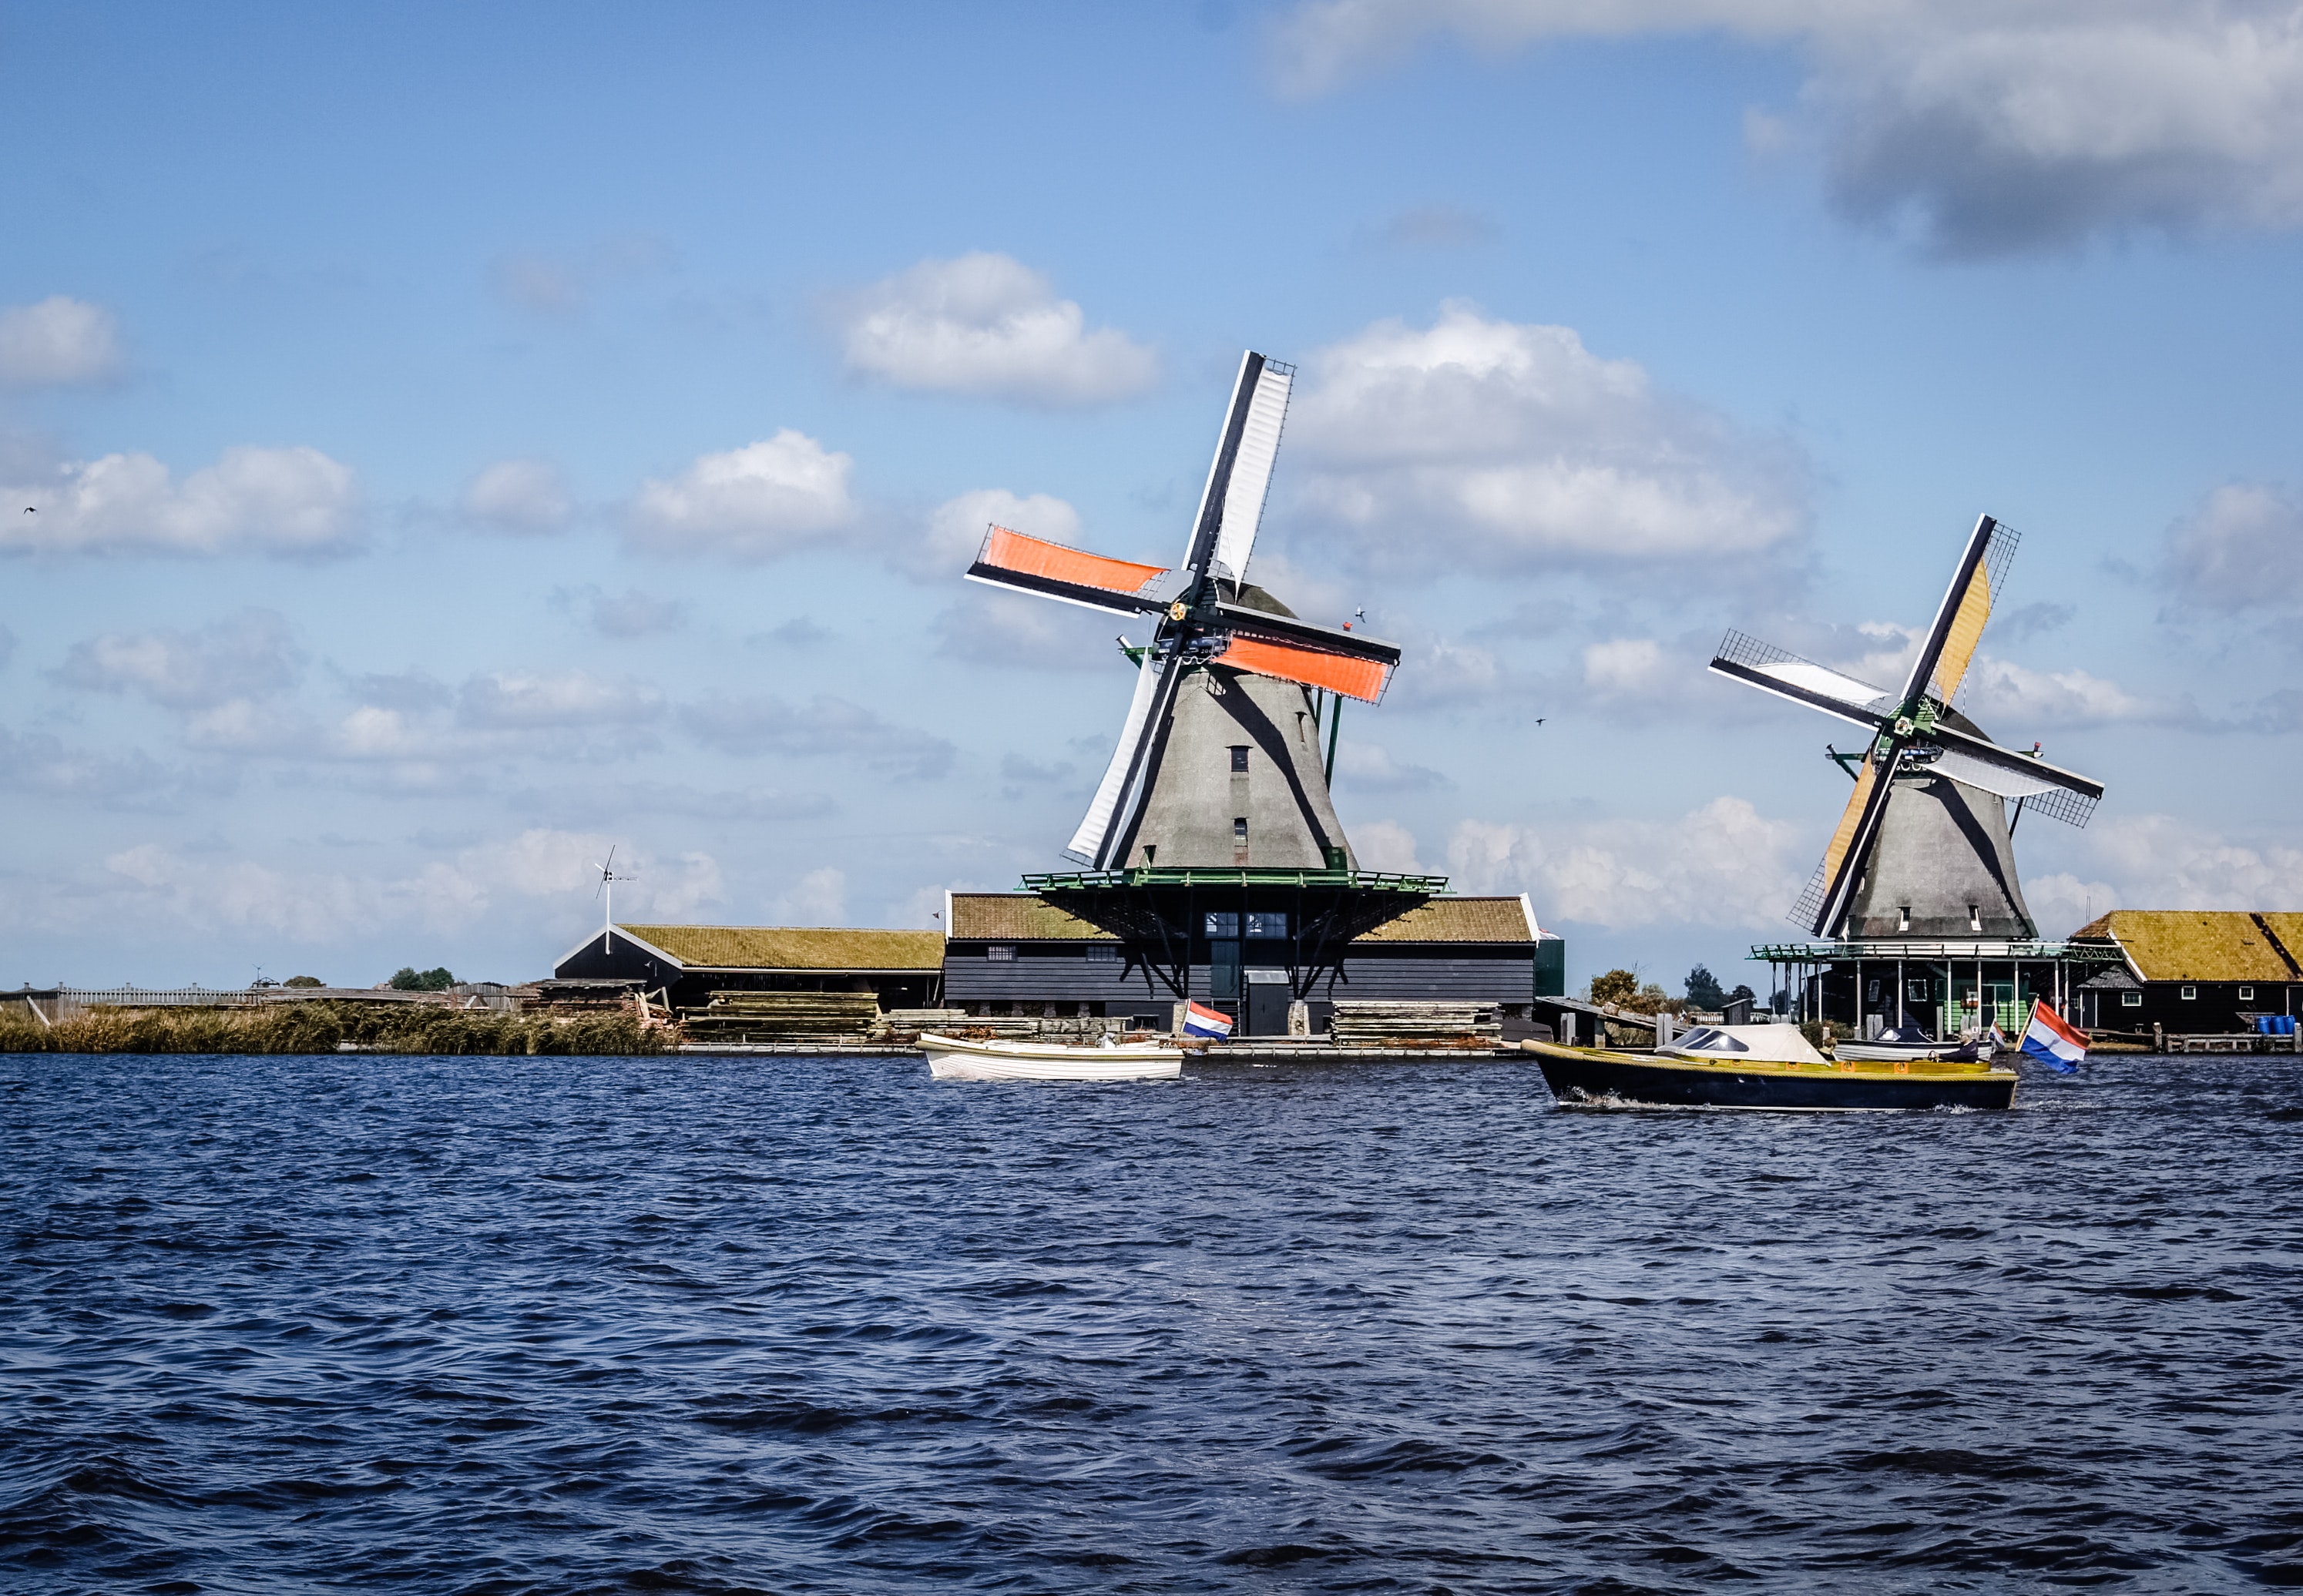 The Netherlands Ranked 4th most Innovative Country